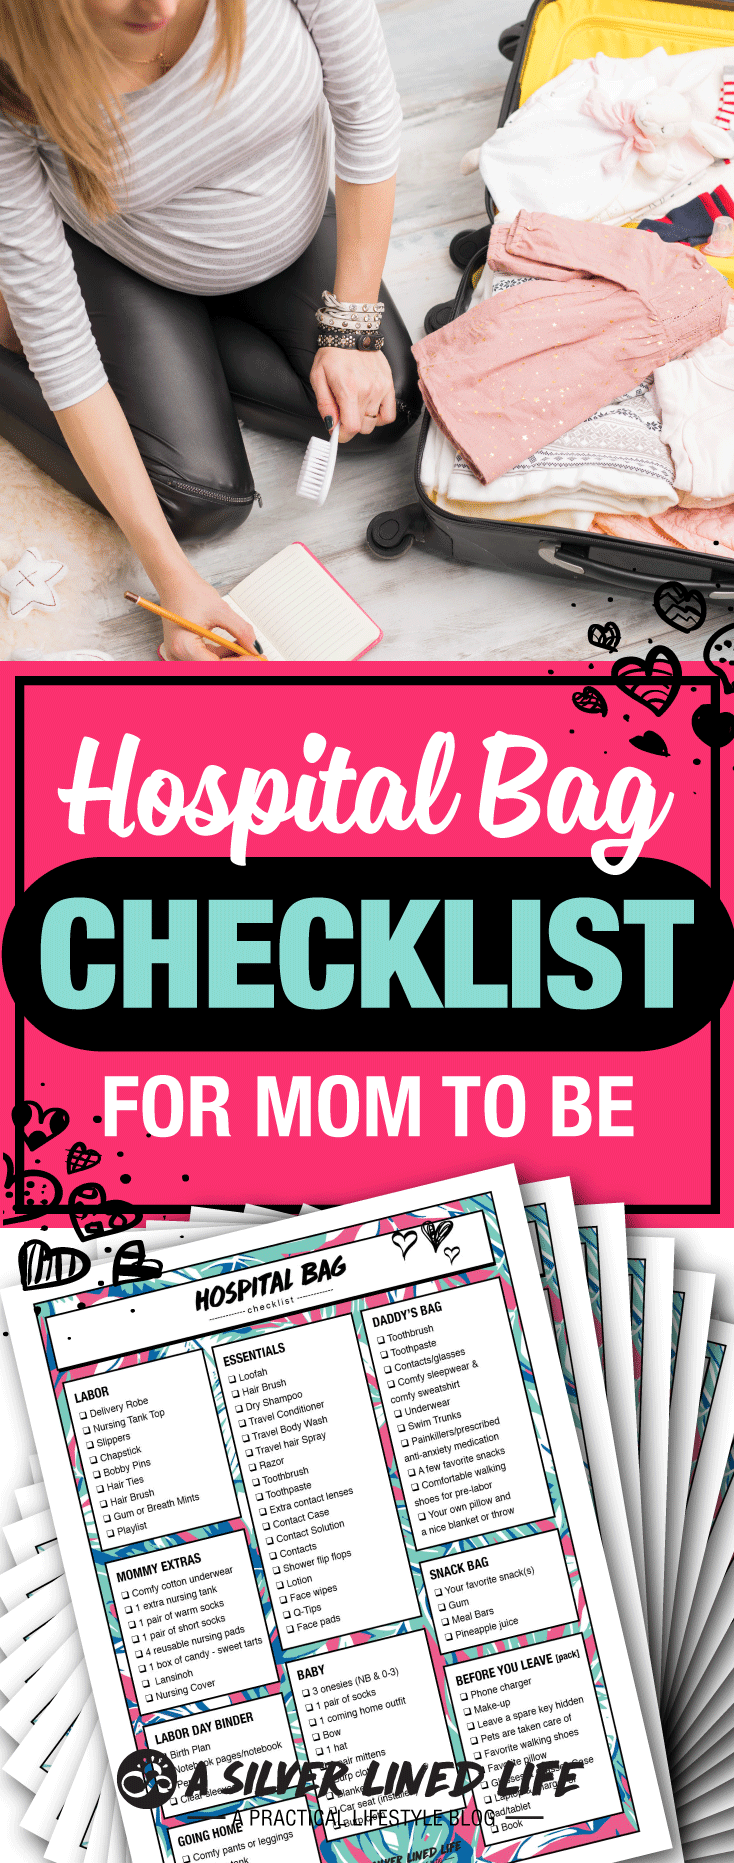 Hospital Bag Checklist, For Mom To Be: FREE Printable! Best packing list for you, your baby and family! A simple, realistic and organized ultimate list. 